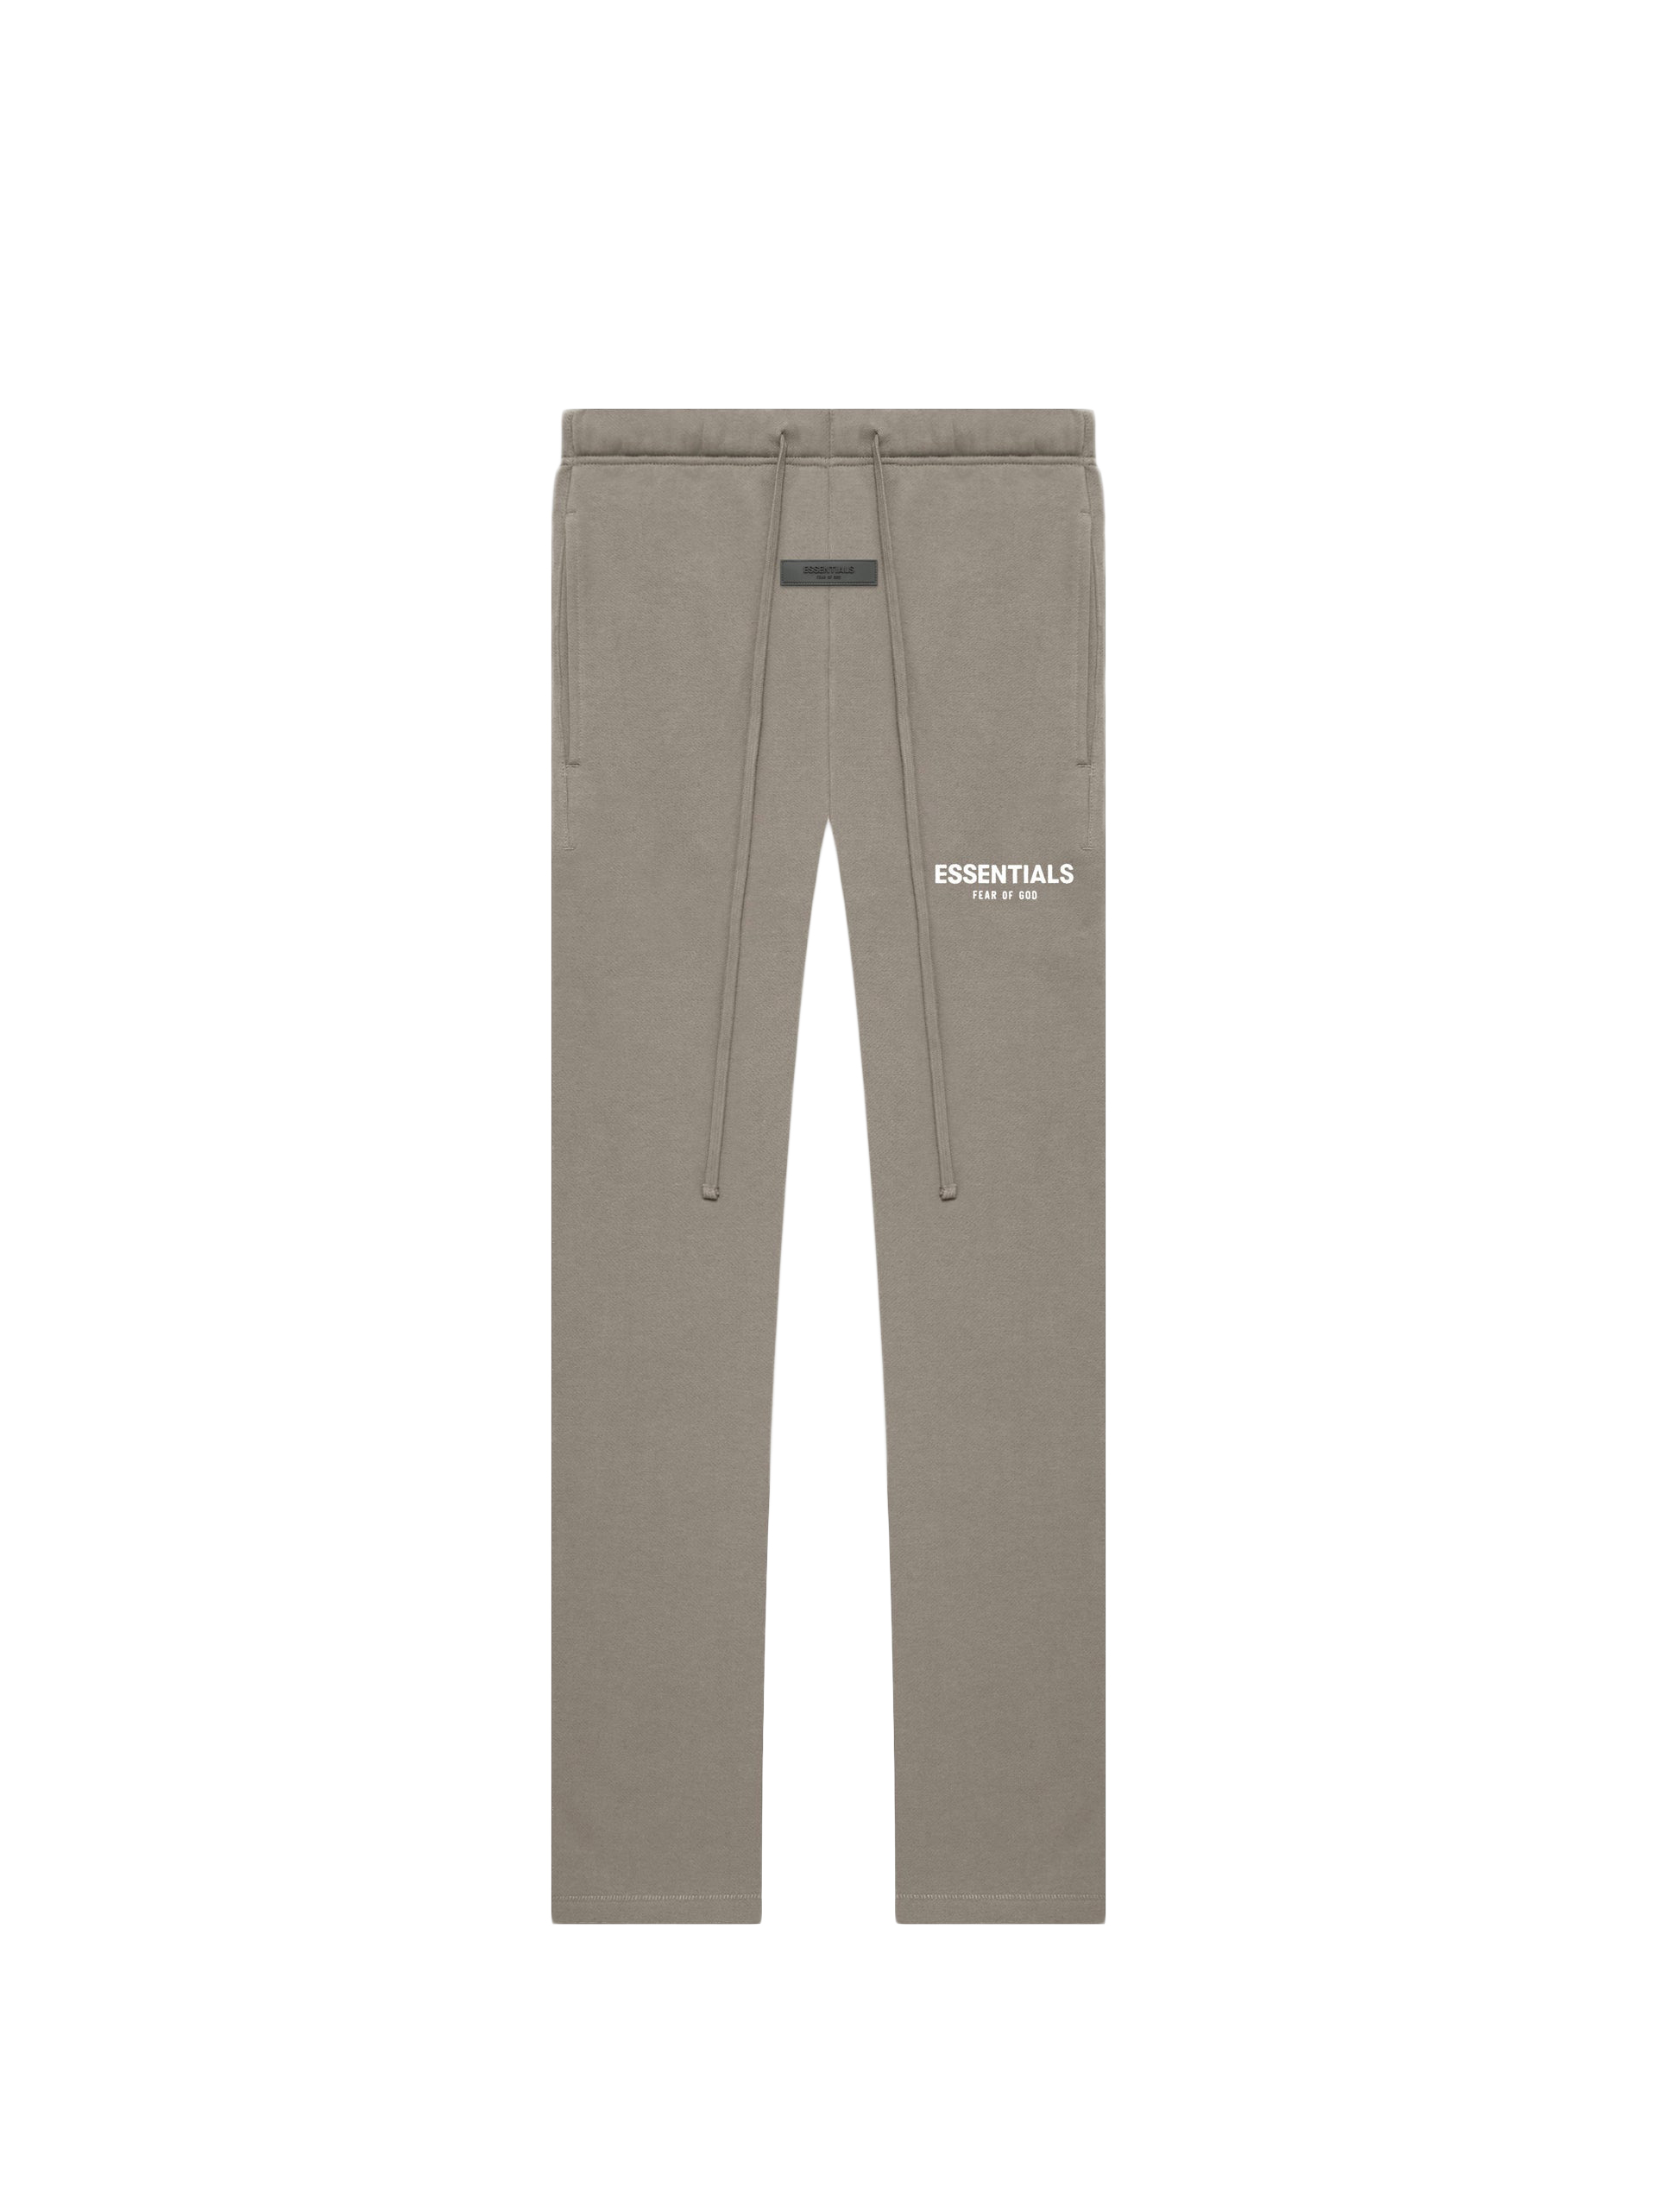 Fear of God Essentials Relaxed Sweatpants Desert Taupe Men's